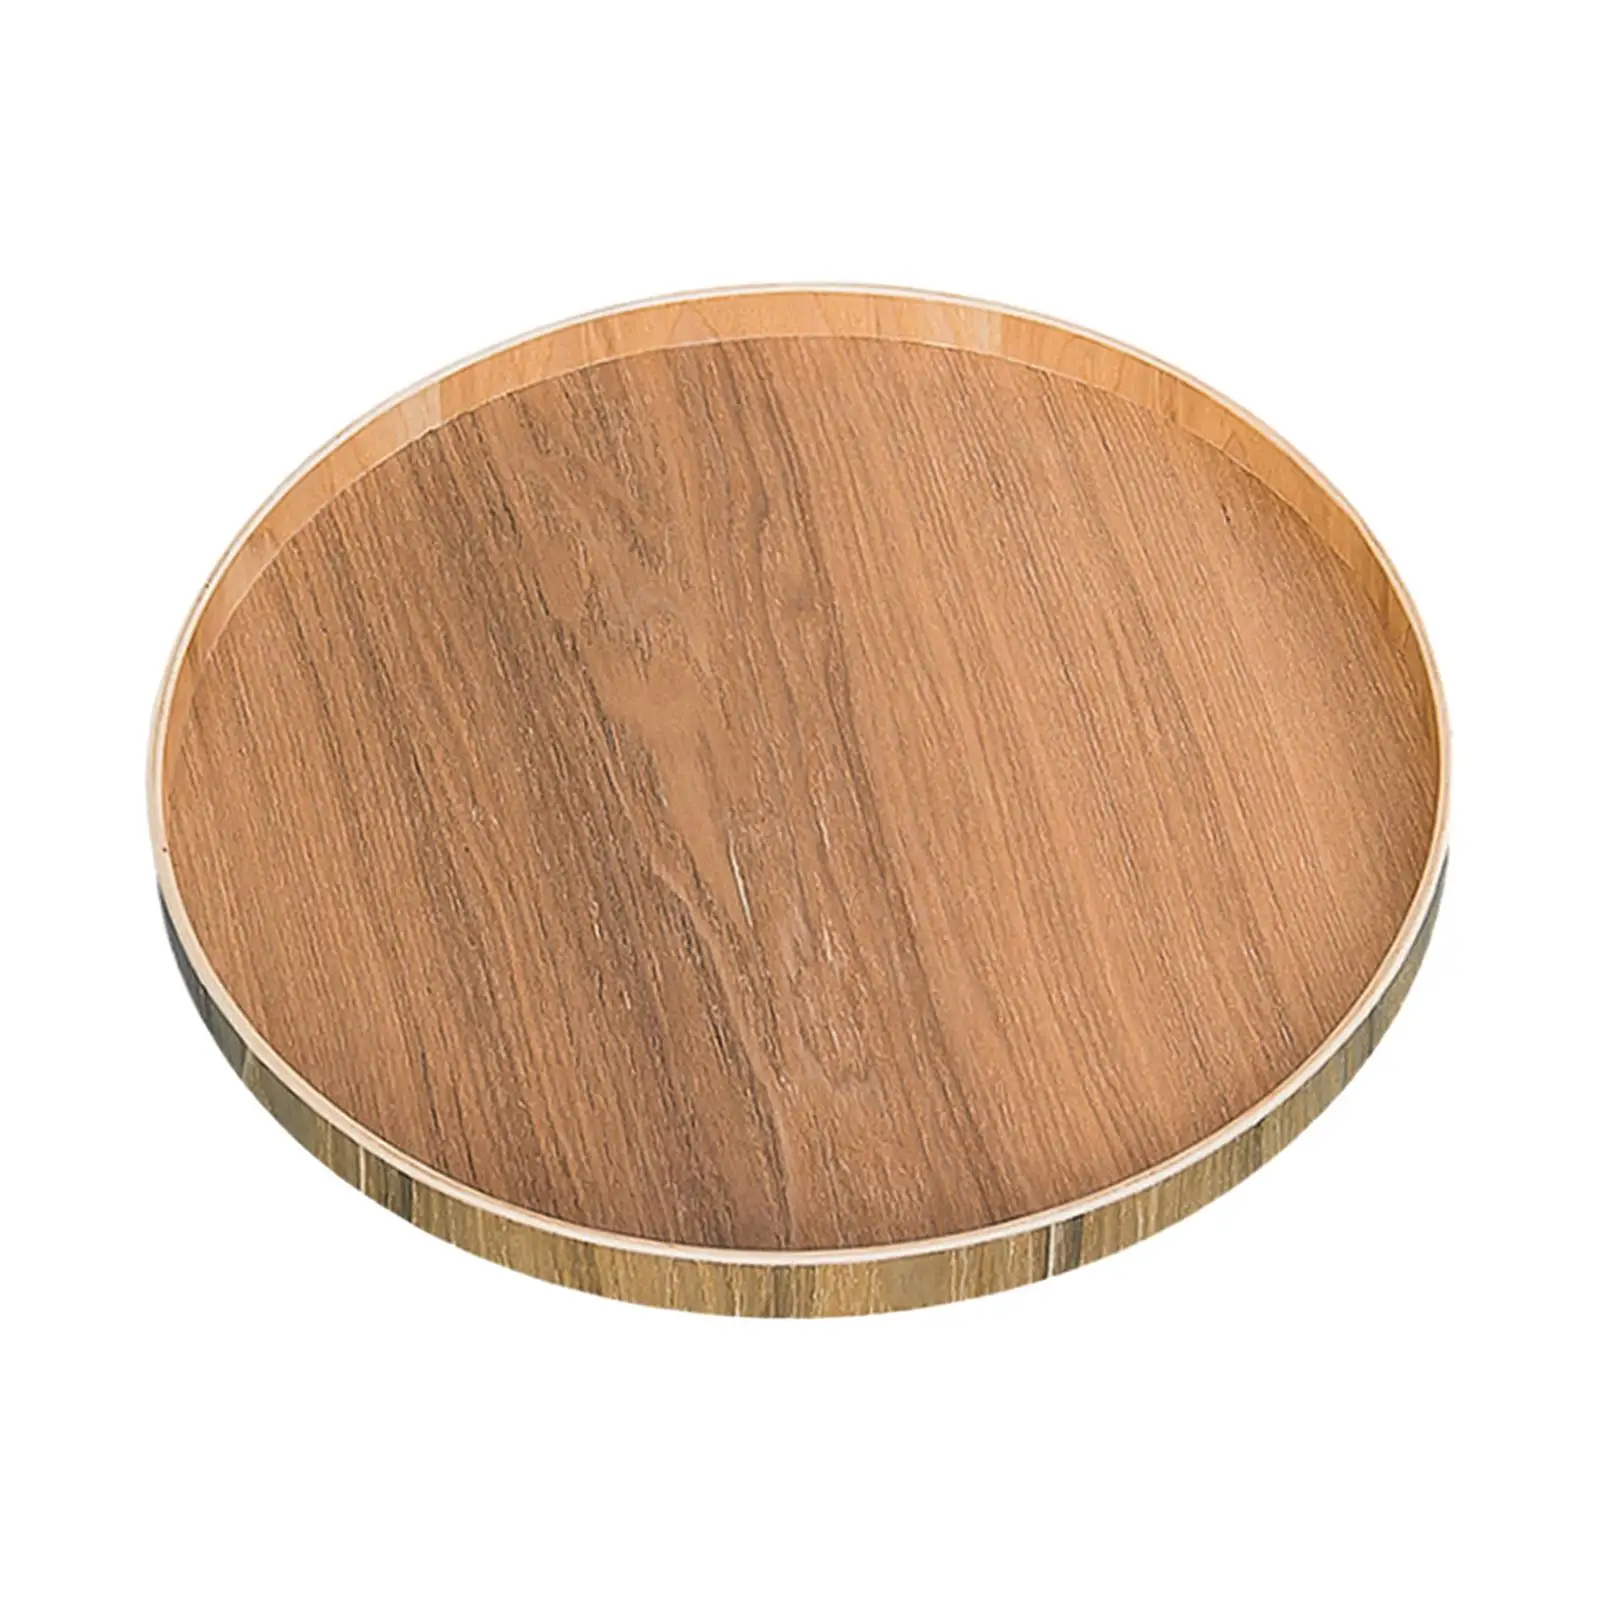 Round Serving Tray Dessert Tray Food Holder Appetizer Organizer for Home Cabinet Pantry Kitchen Countertop Table Centerpiece